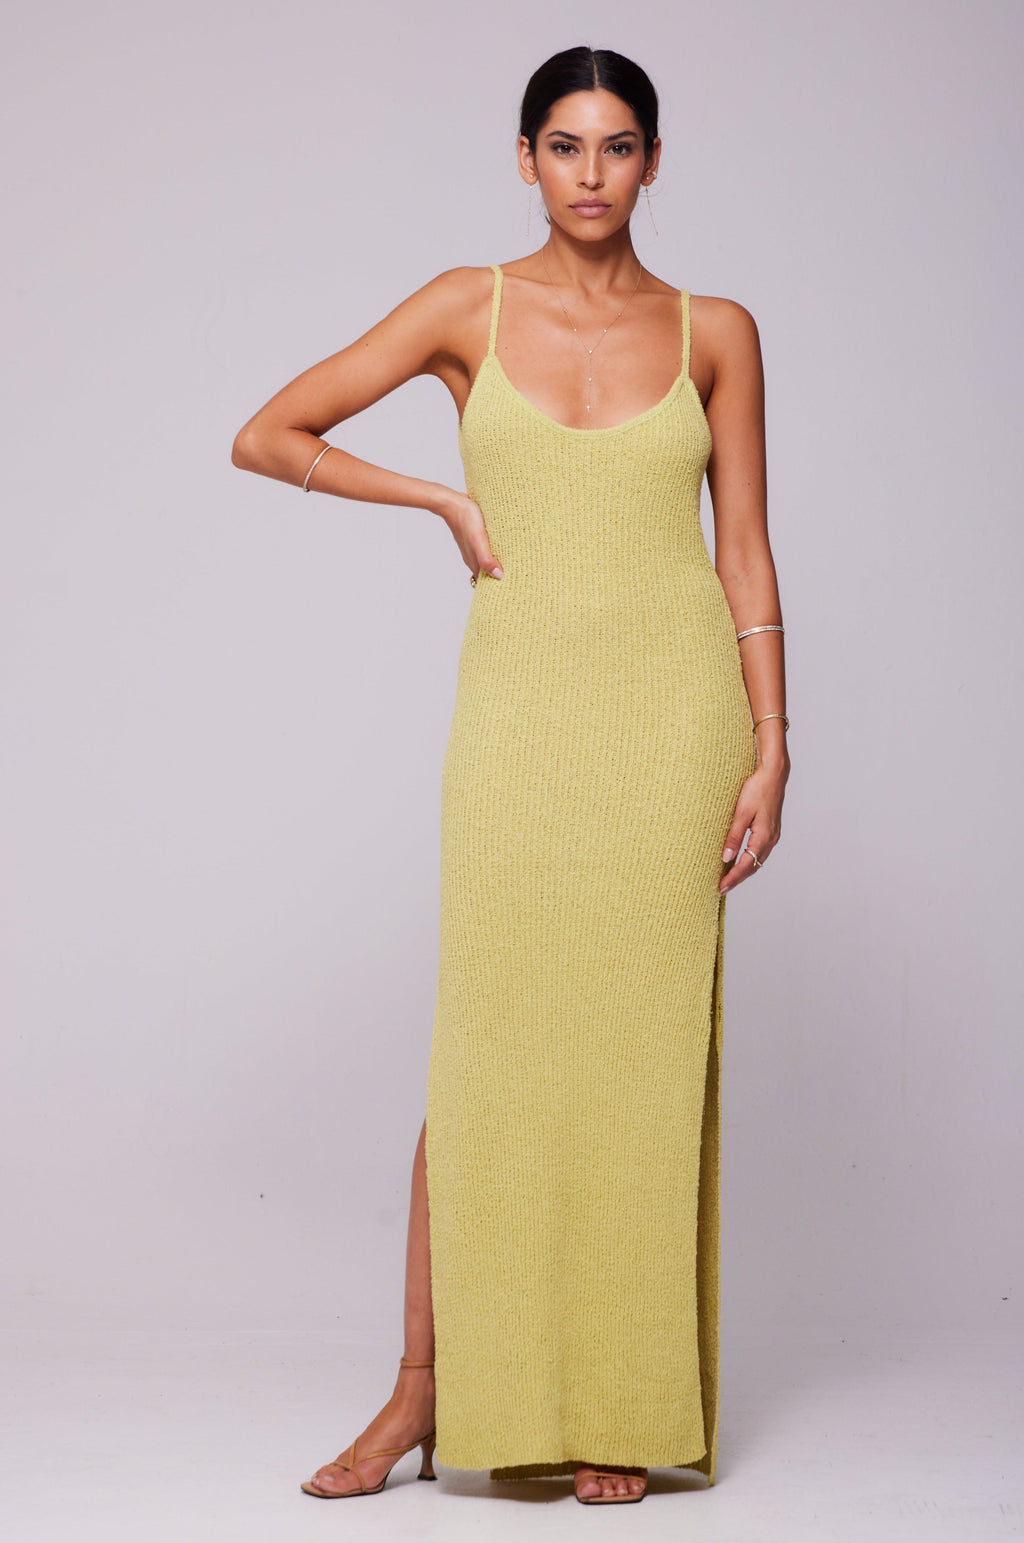 This is an image of Sohni Dress in Lime - RESA featuring a model wearing the dress